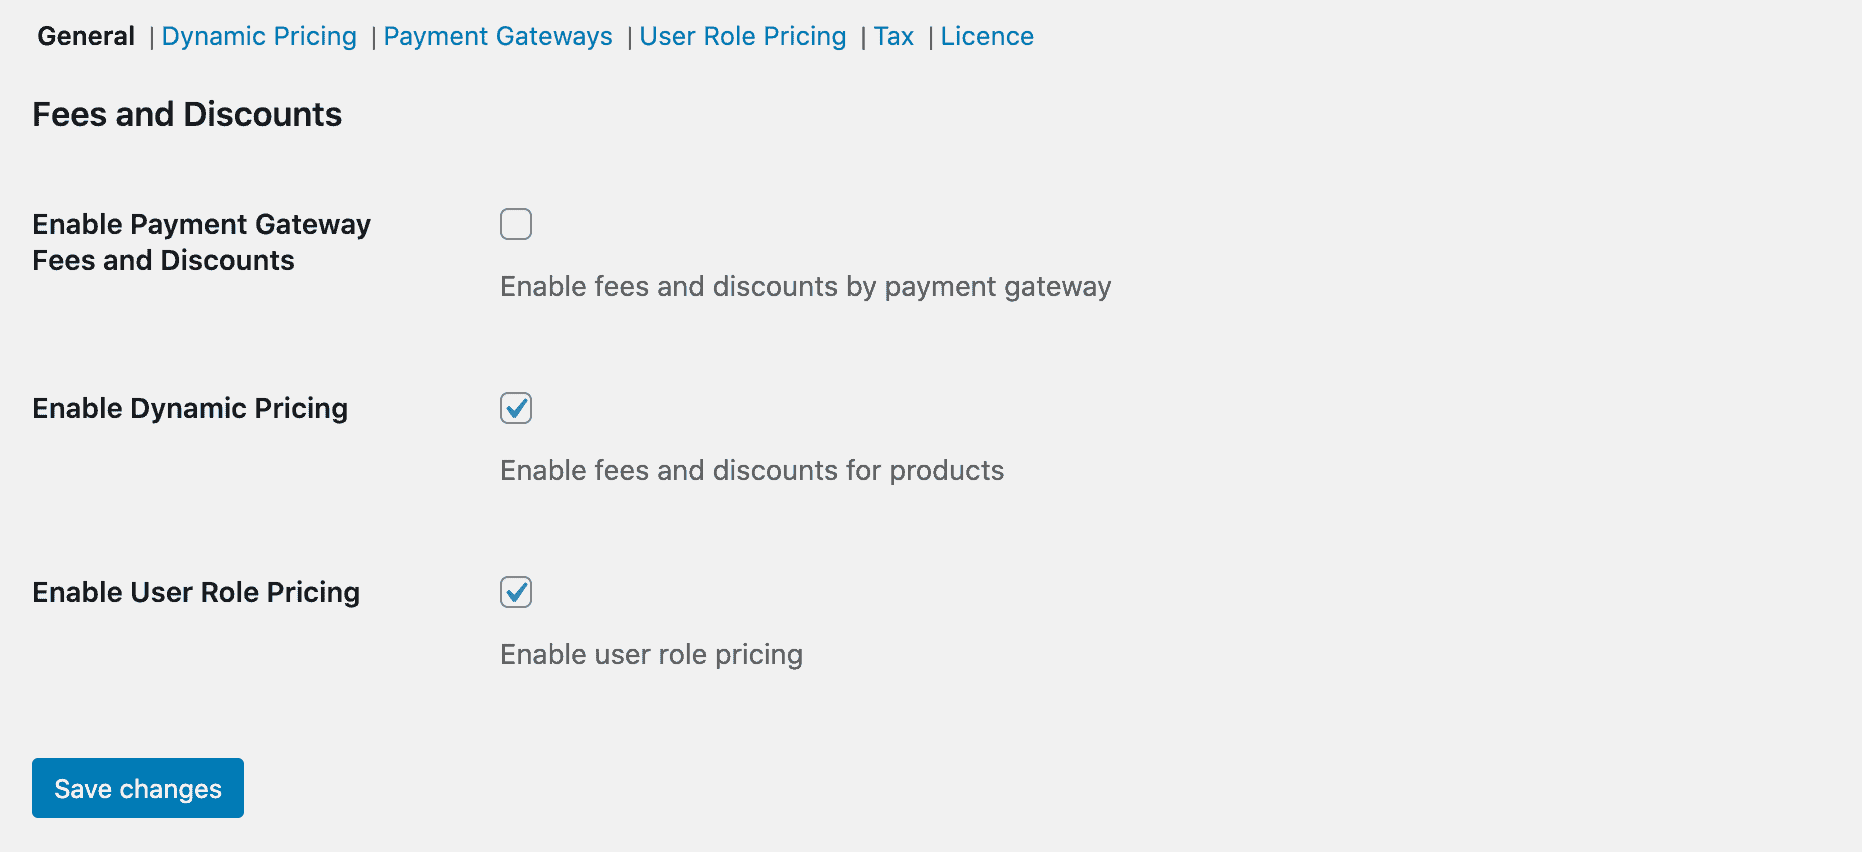 Enable user role pricing